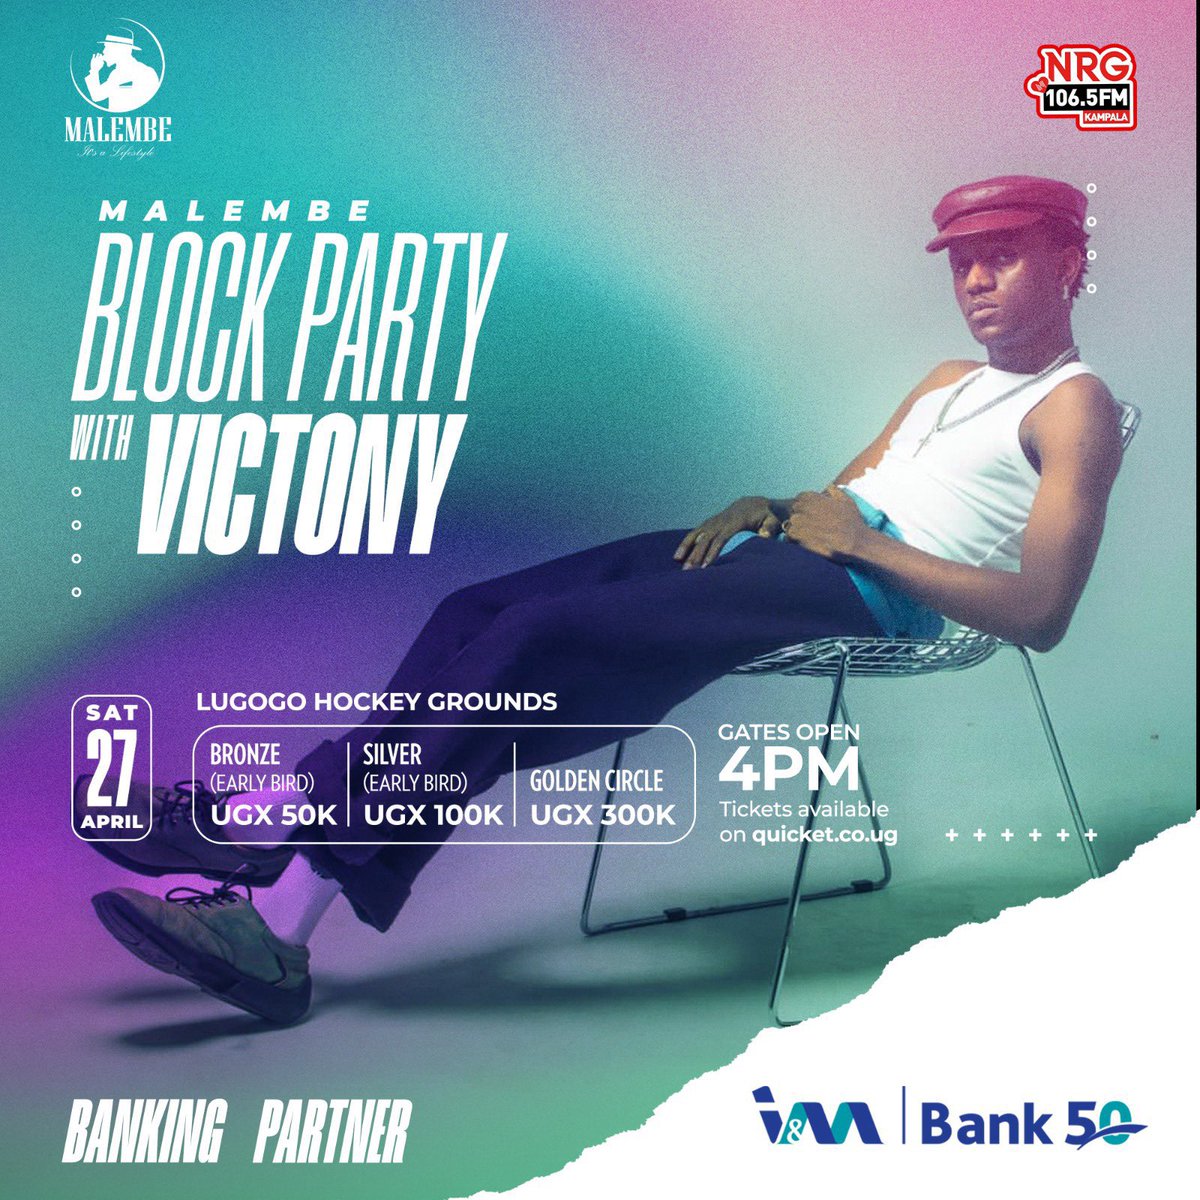 The block party is calling! Have you secured your ticket yet? If not, grab one today using your I&M Bank Mastercard. #IMBankAt50 #OnYourSide #MalembeLifestyle